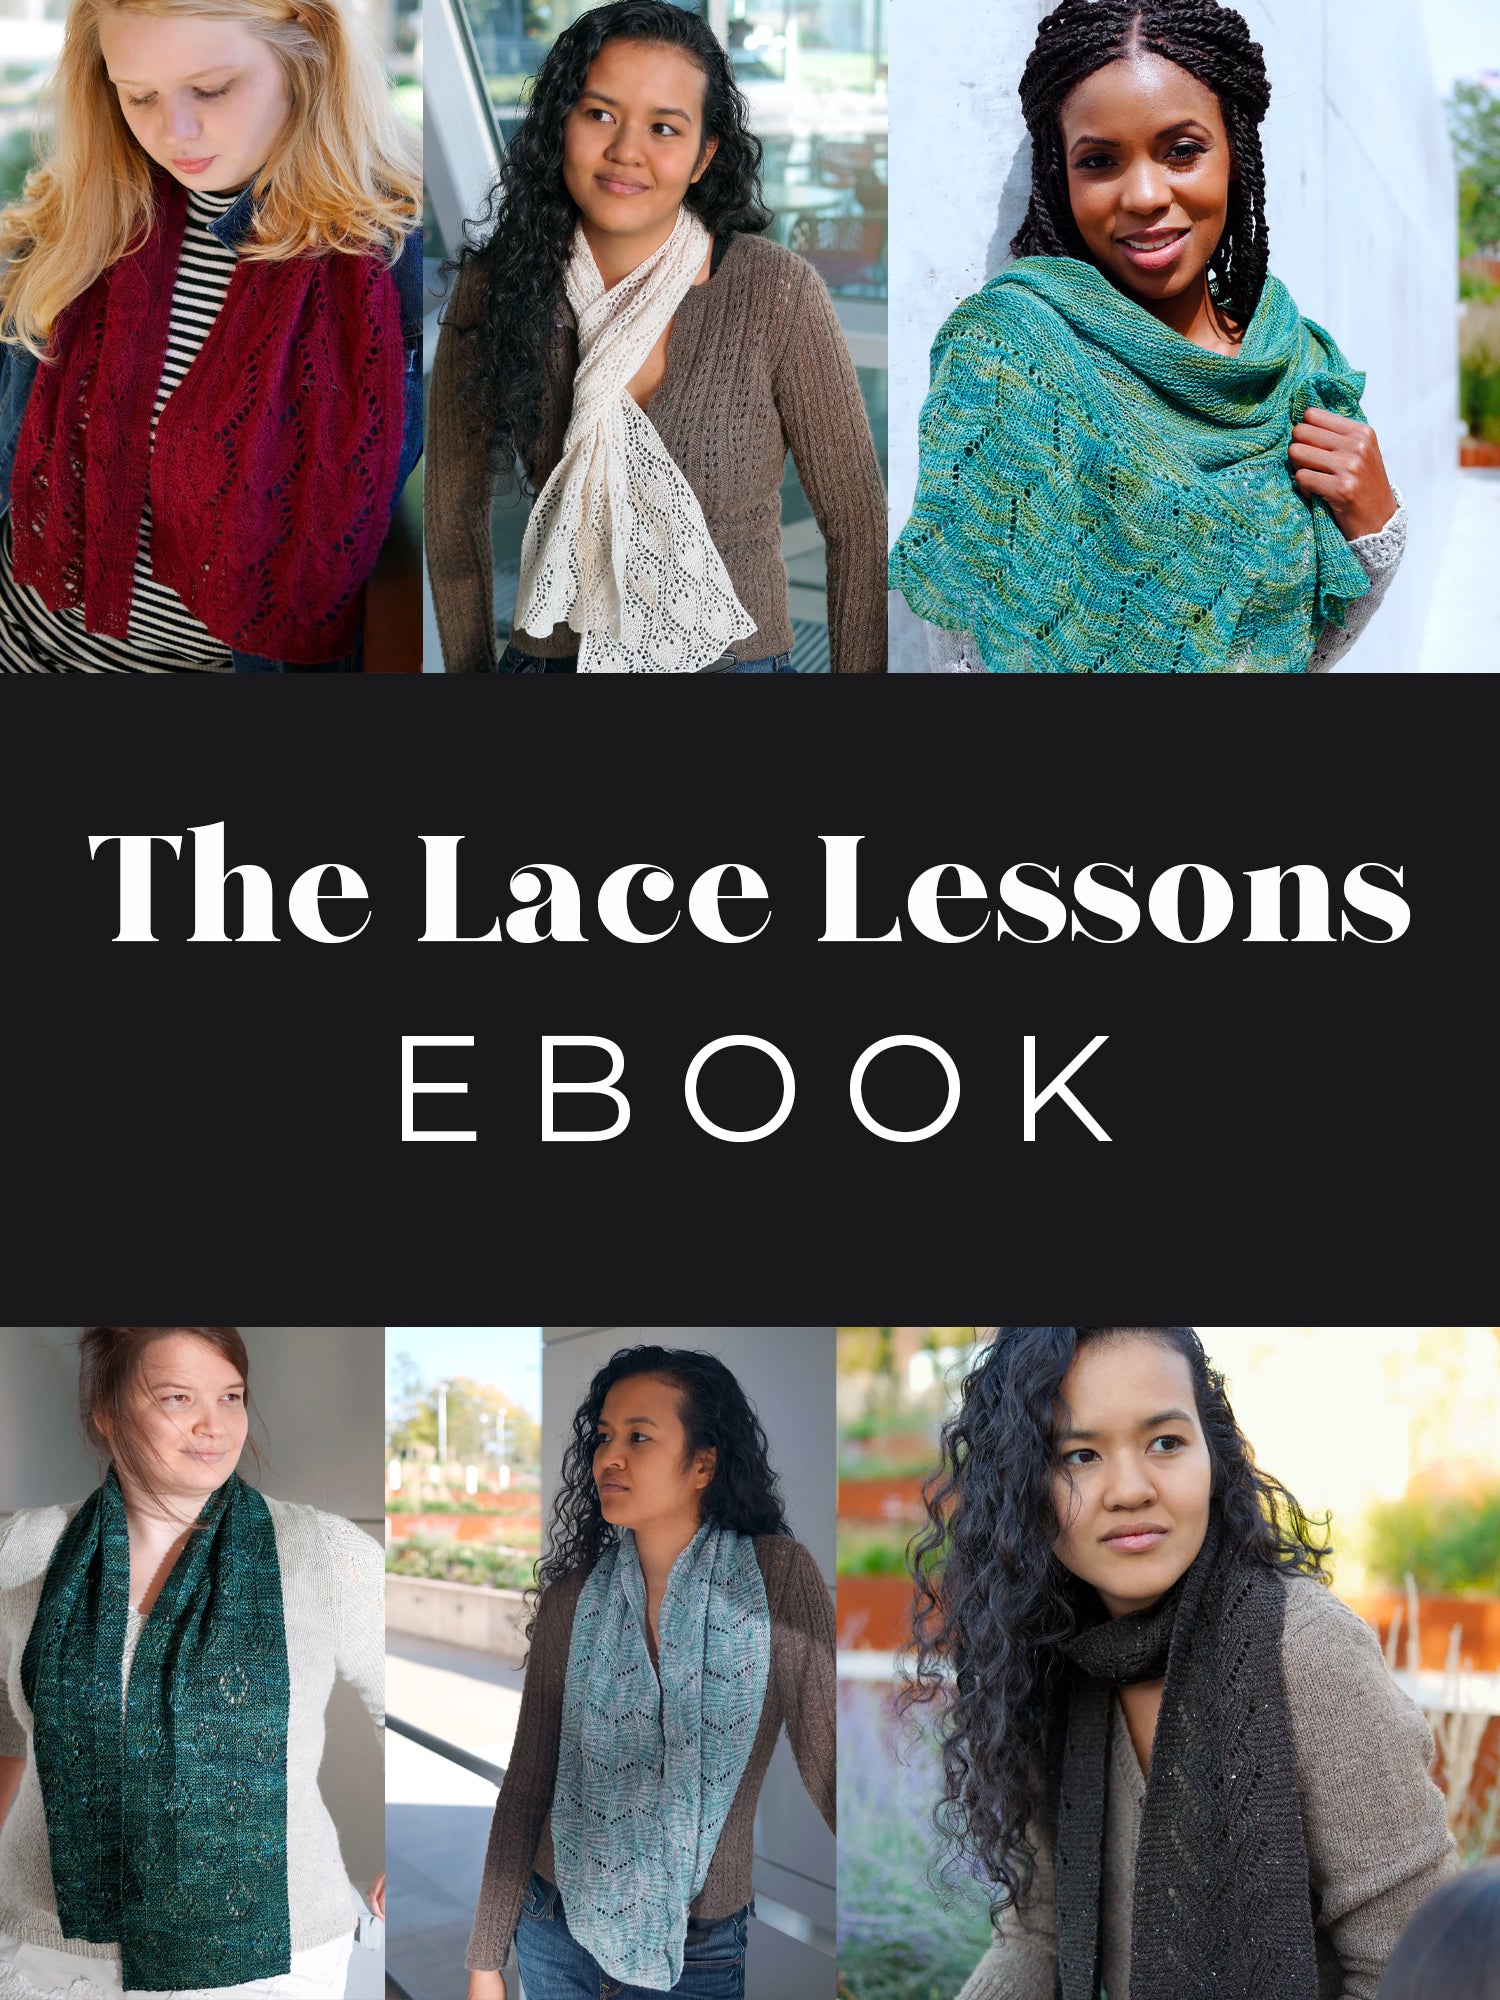 The Lace Lessons: New Little Nothings and Variations